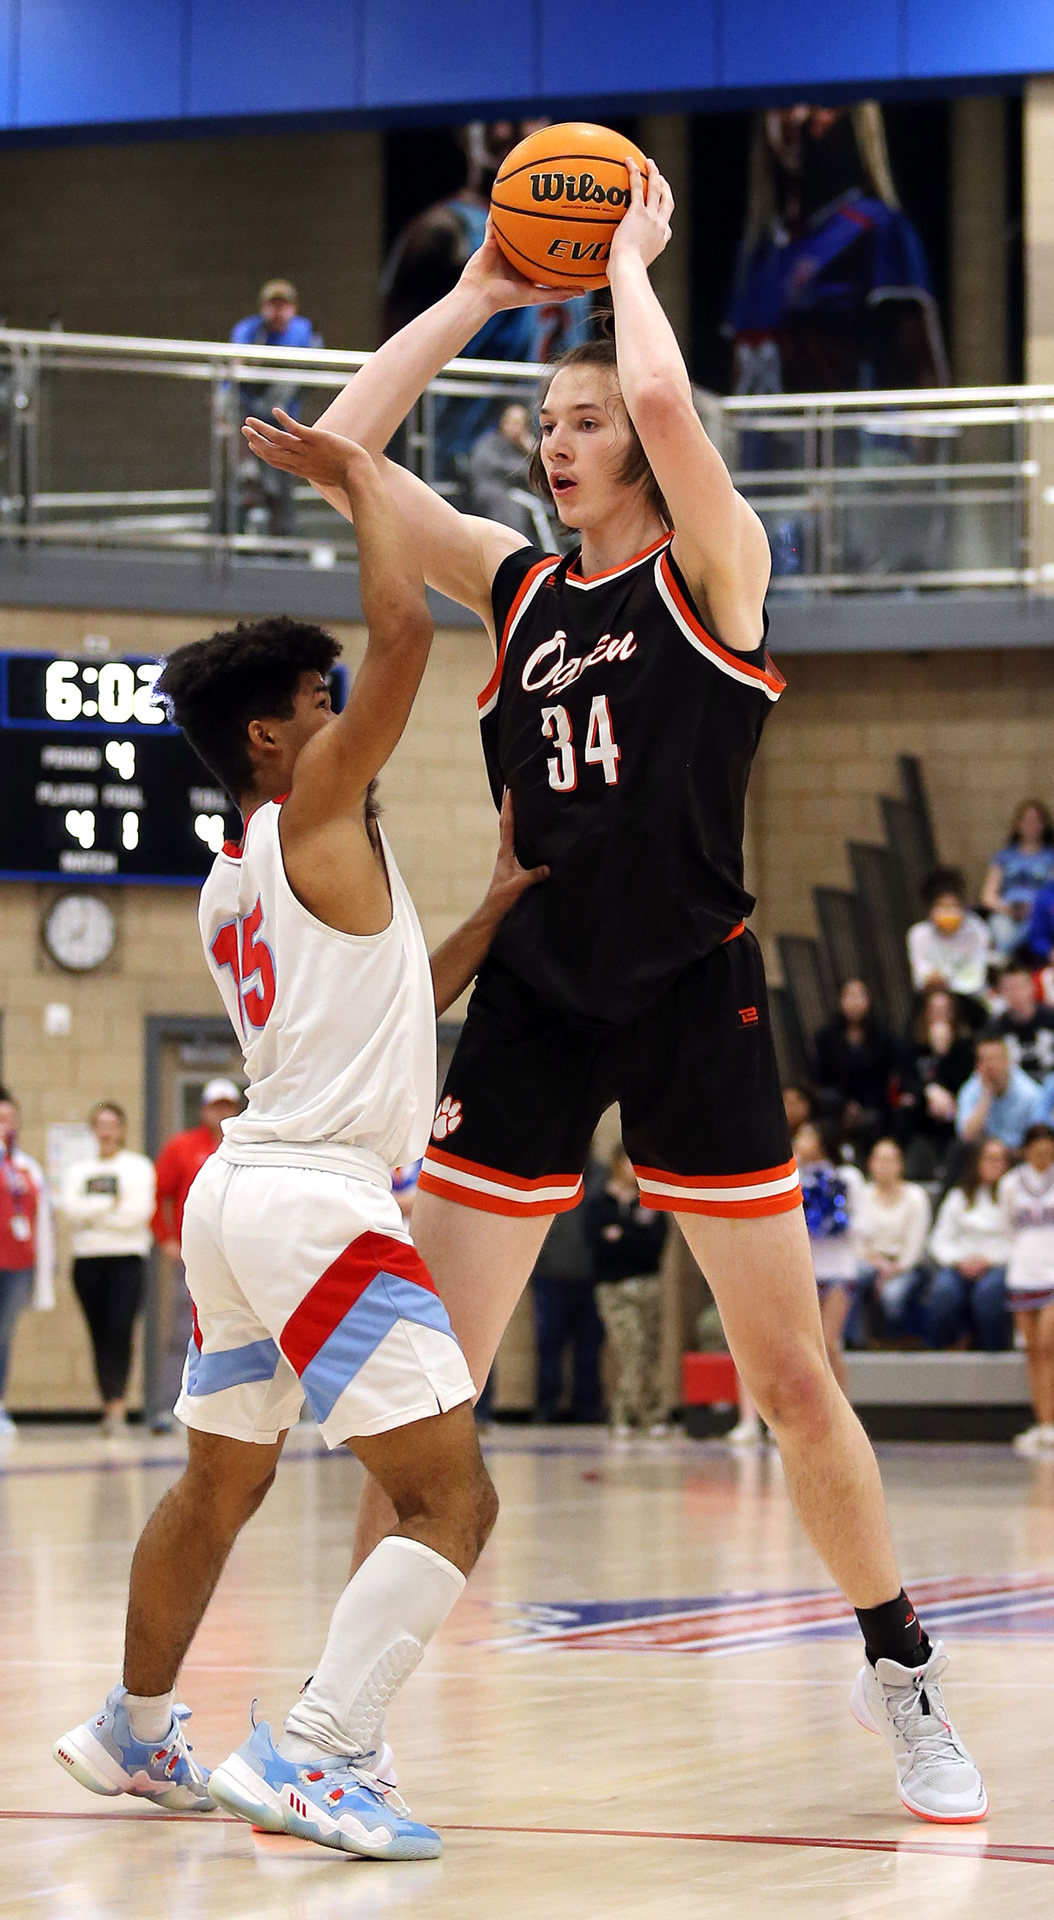 Images: Tallest high school basketball player